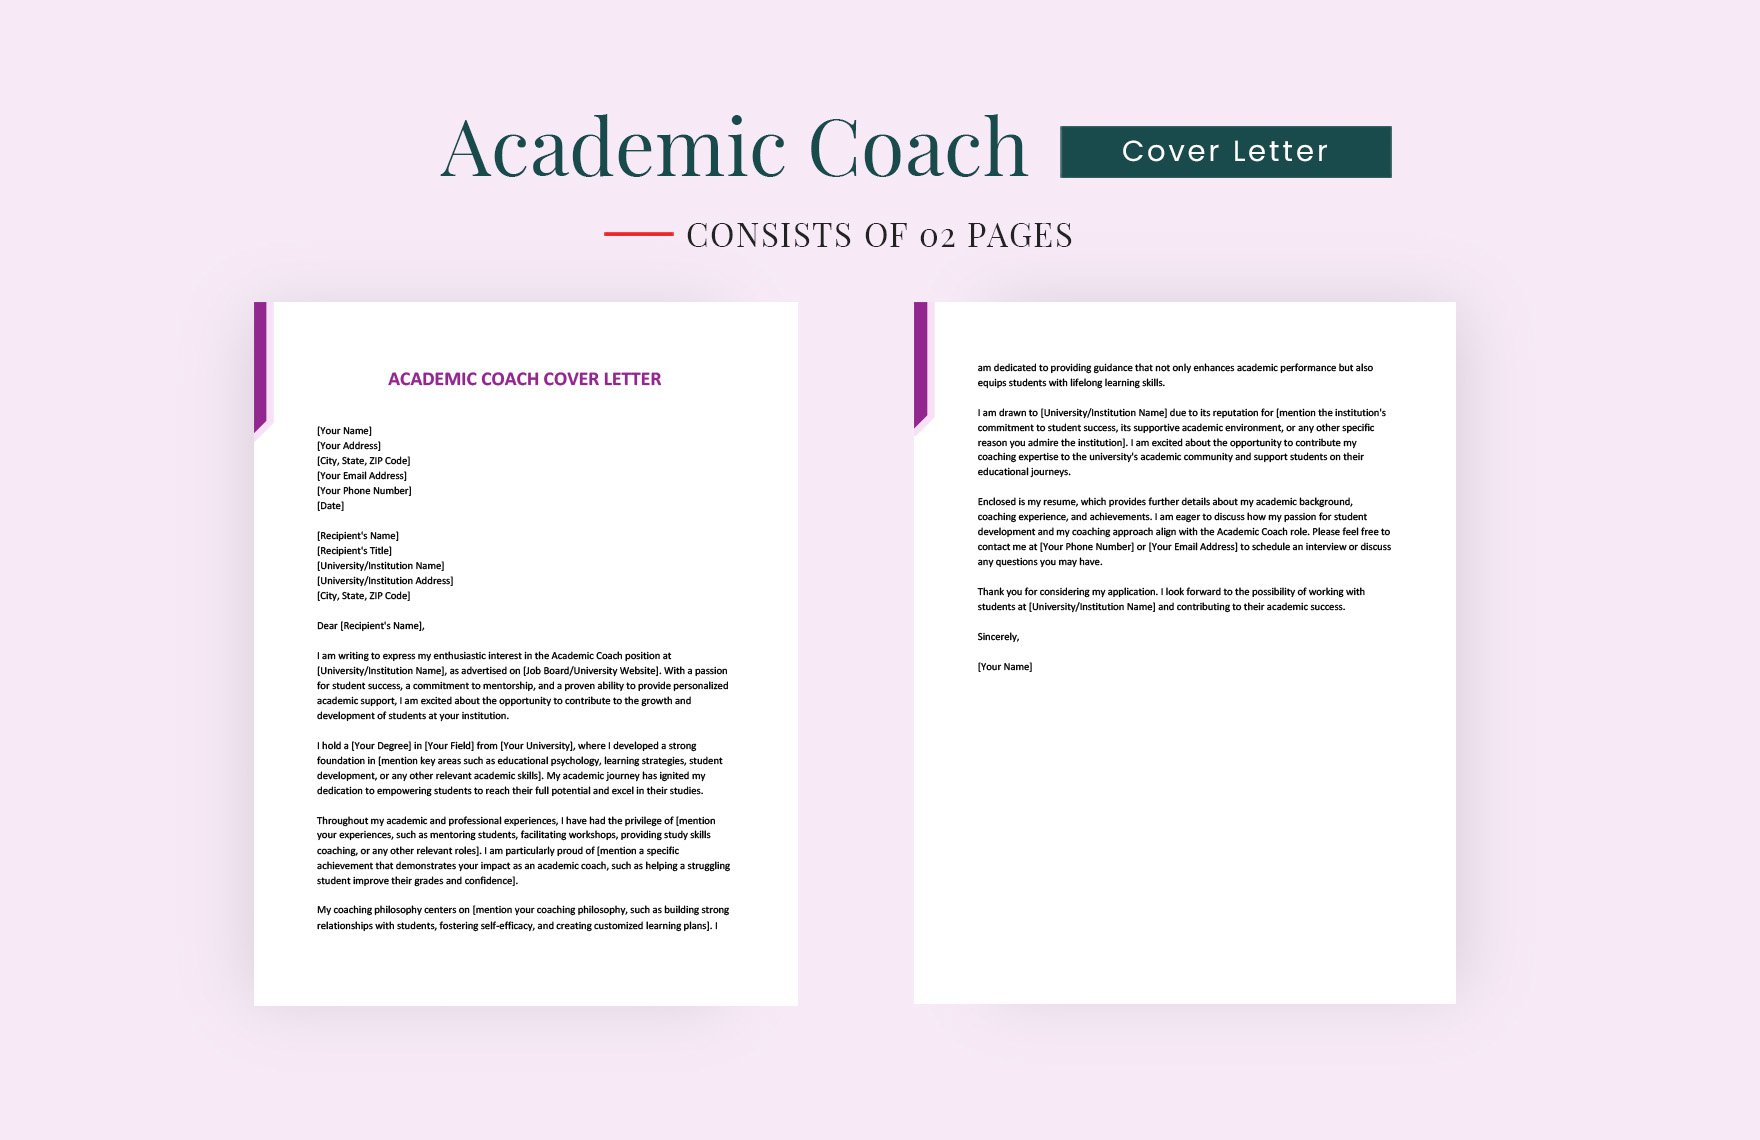 Academic Coach Cover Letter